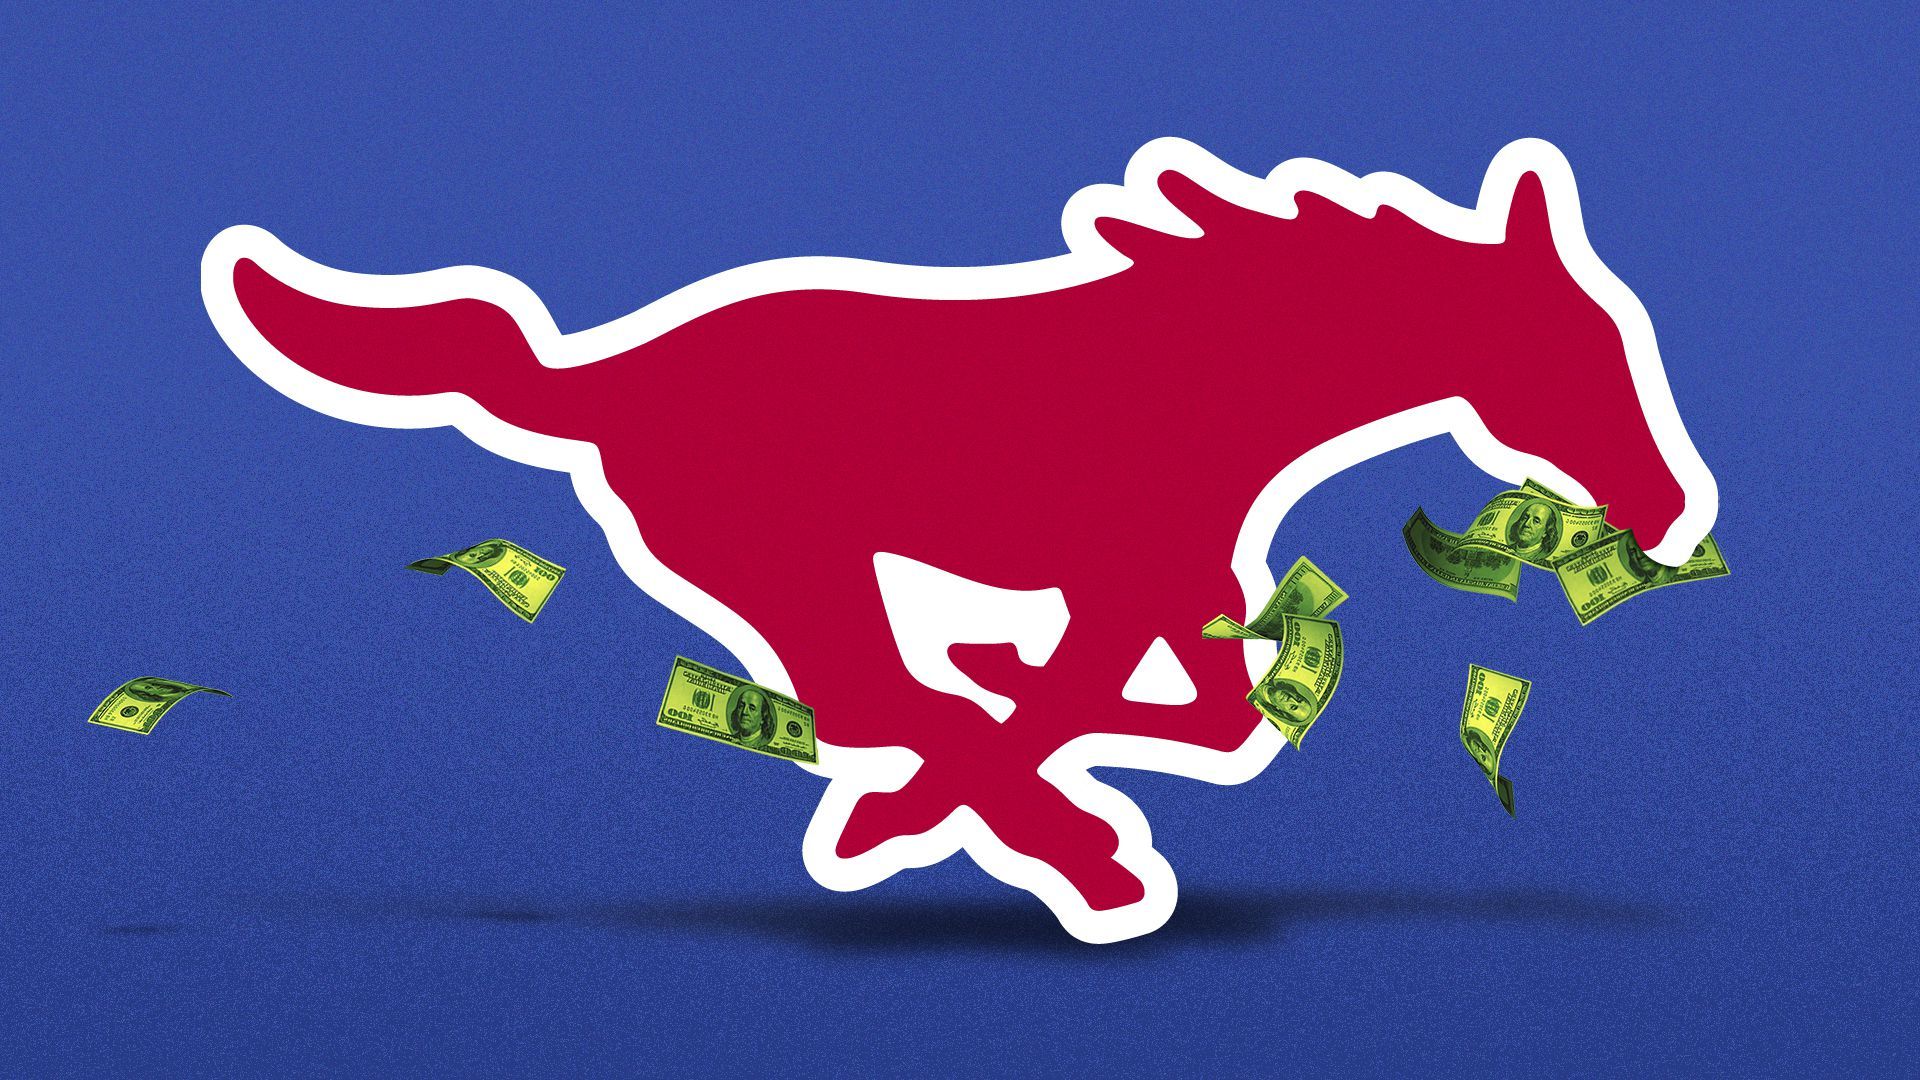 Illustration fo the SMU Mustang with money in its mouth